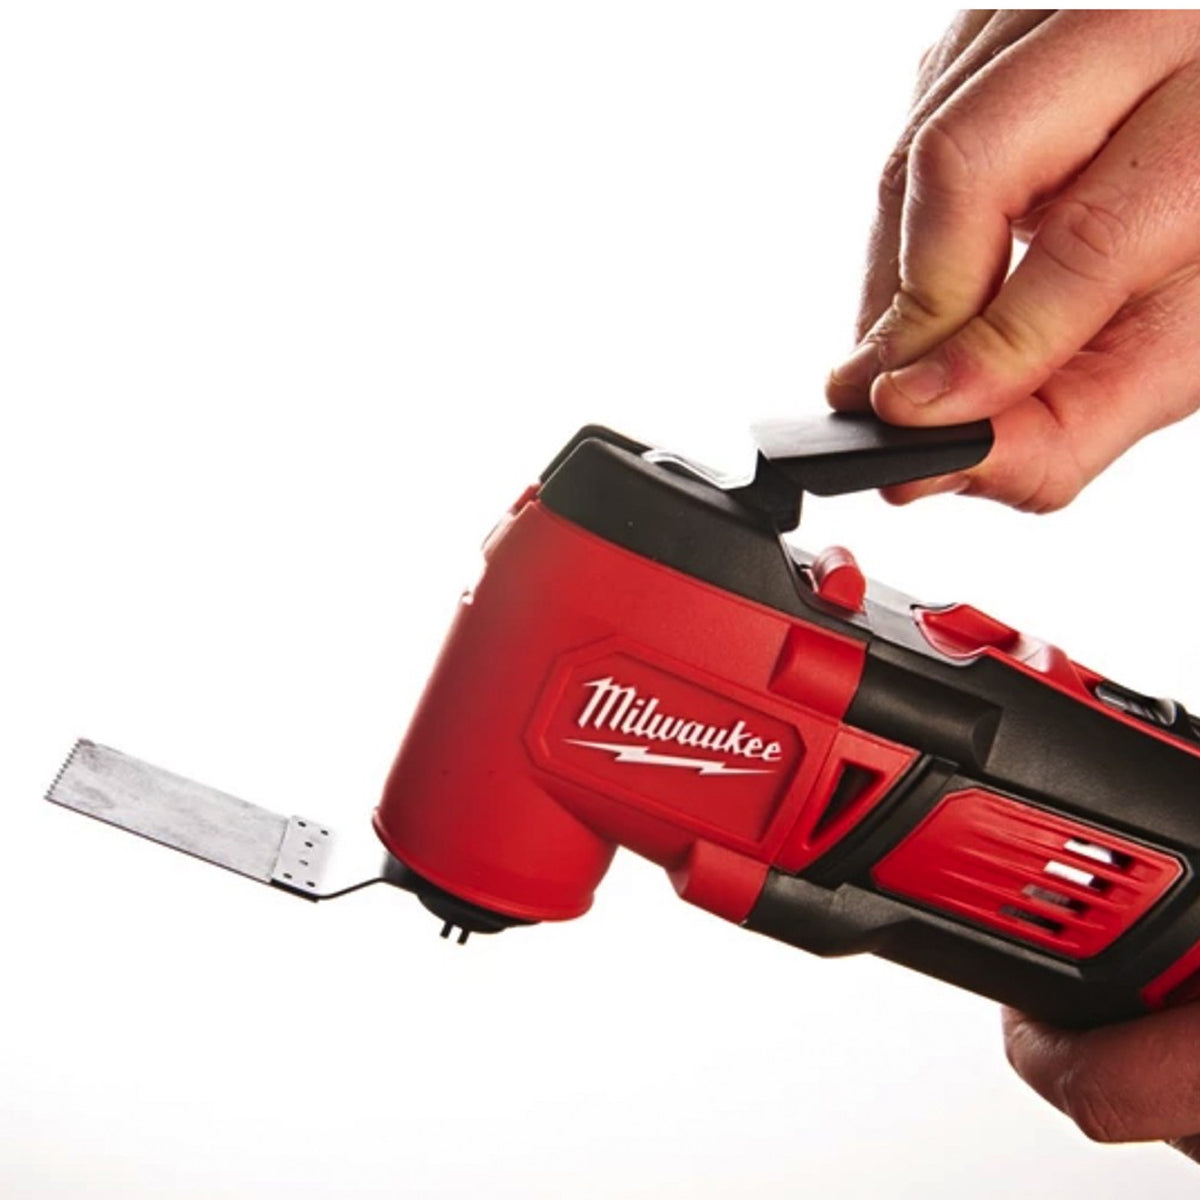 Milwaukee M18BMT-0 M18 18V Compact Multi Tool Body with 39 Piece Accessories Set